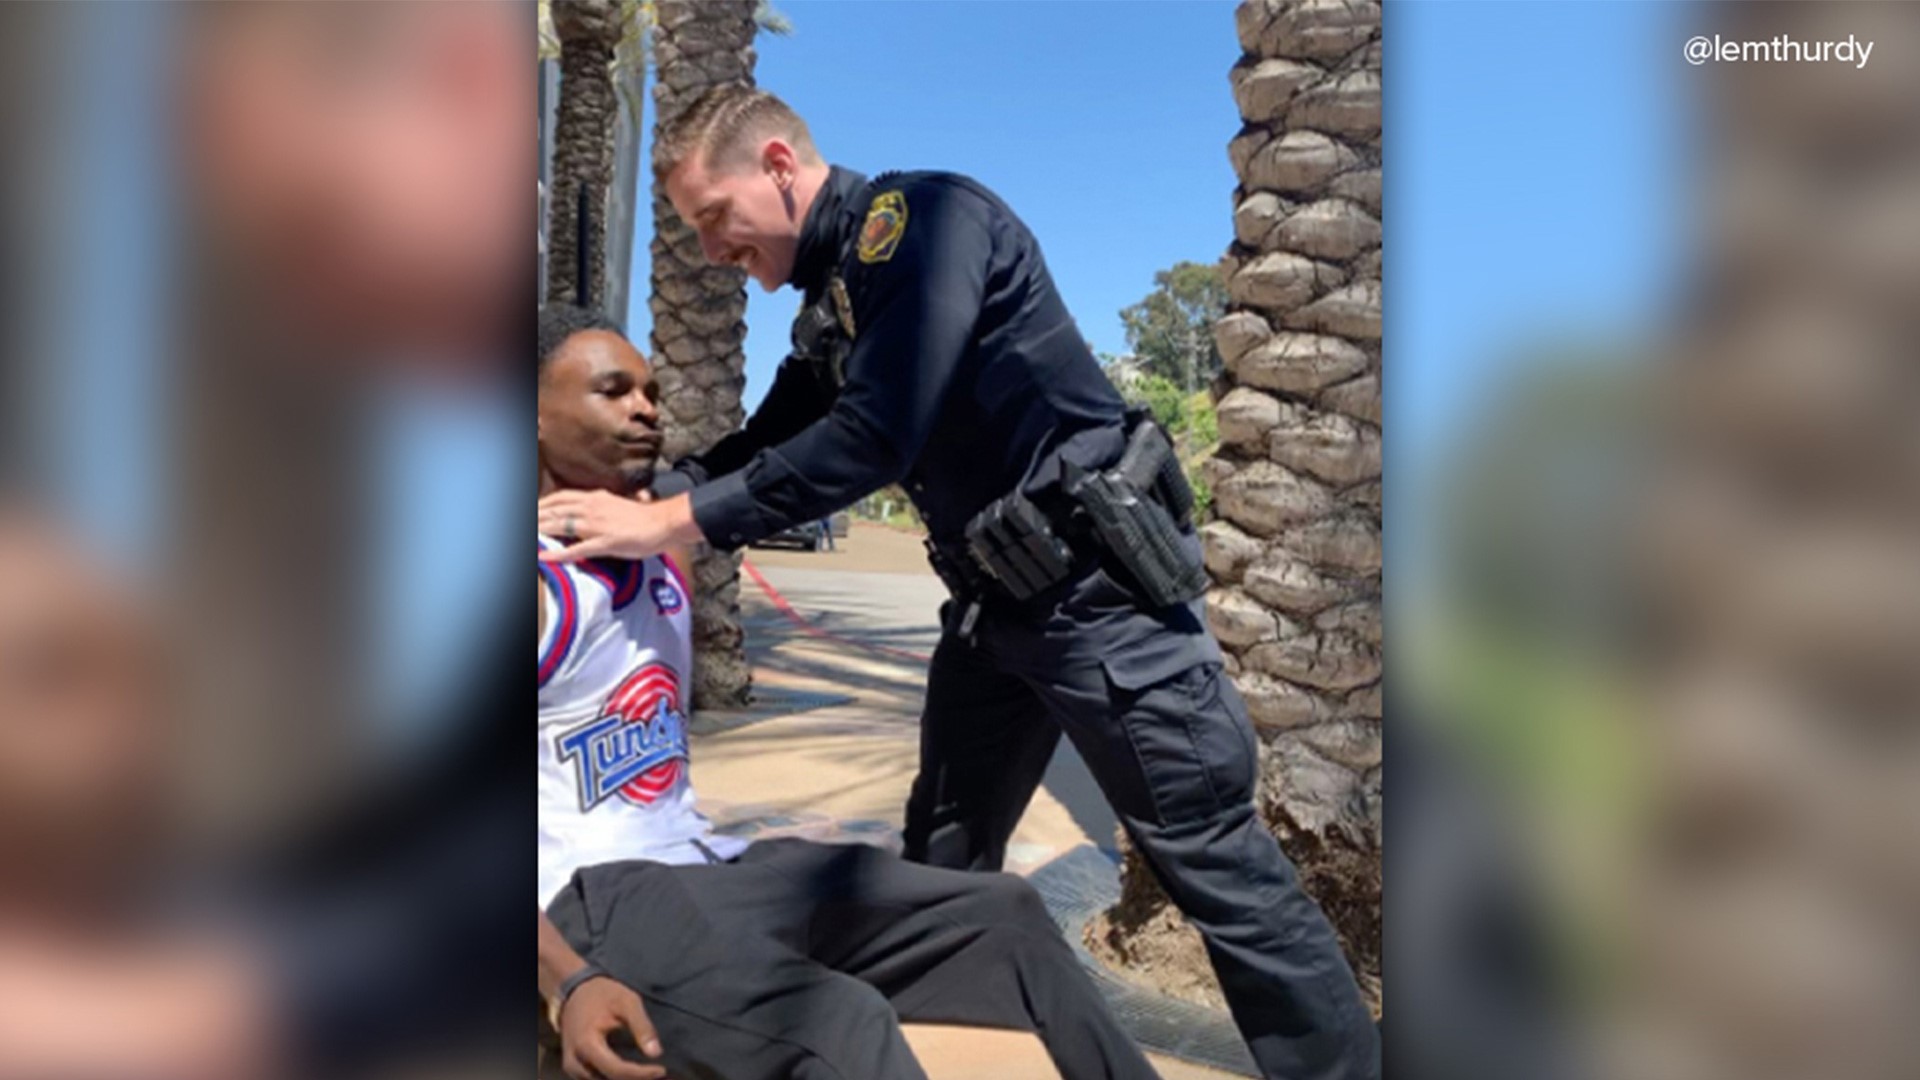 "This is a step in the right direction," Amaurie Johnson's attorney told News 8, following the felony charge against former La Mesa police officer Matthew Dages.